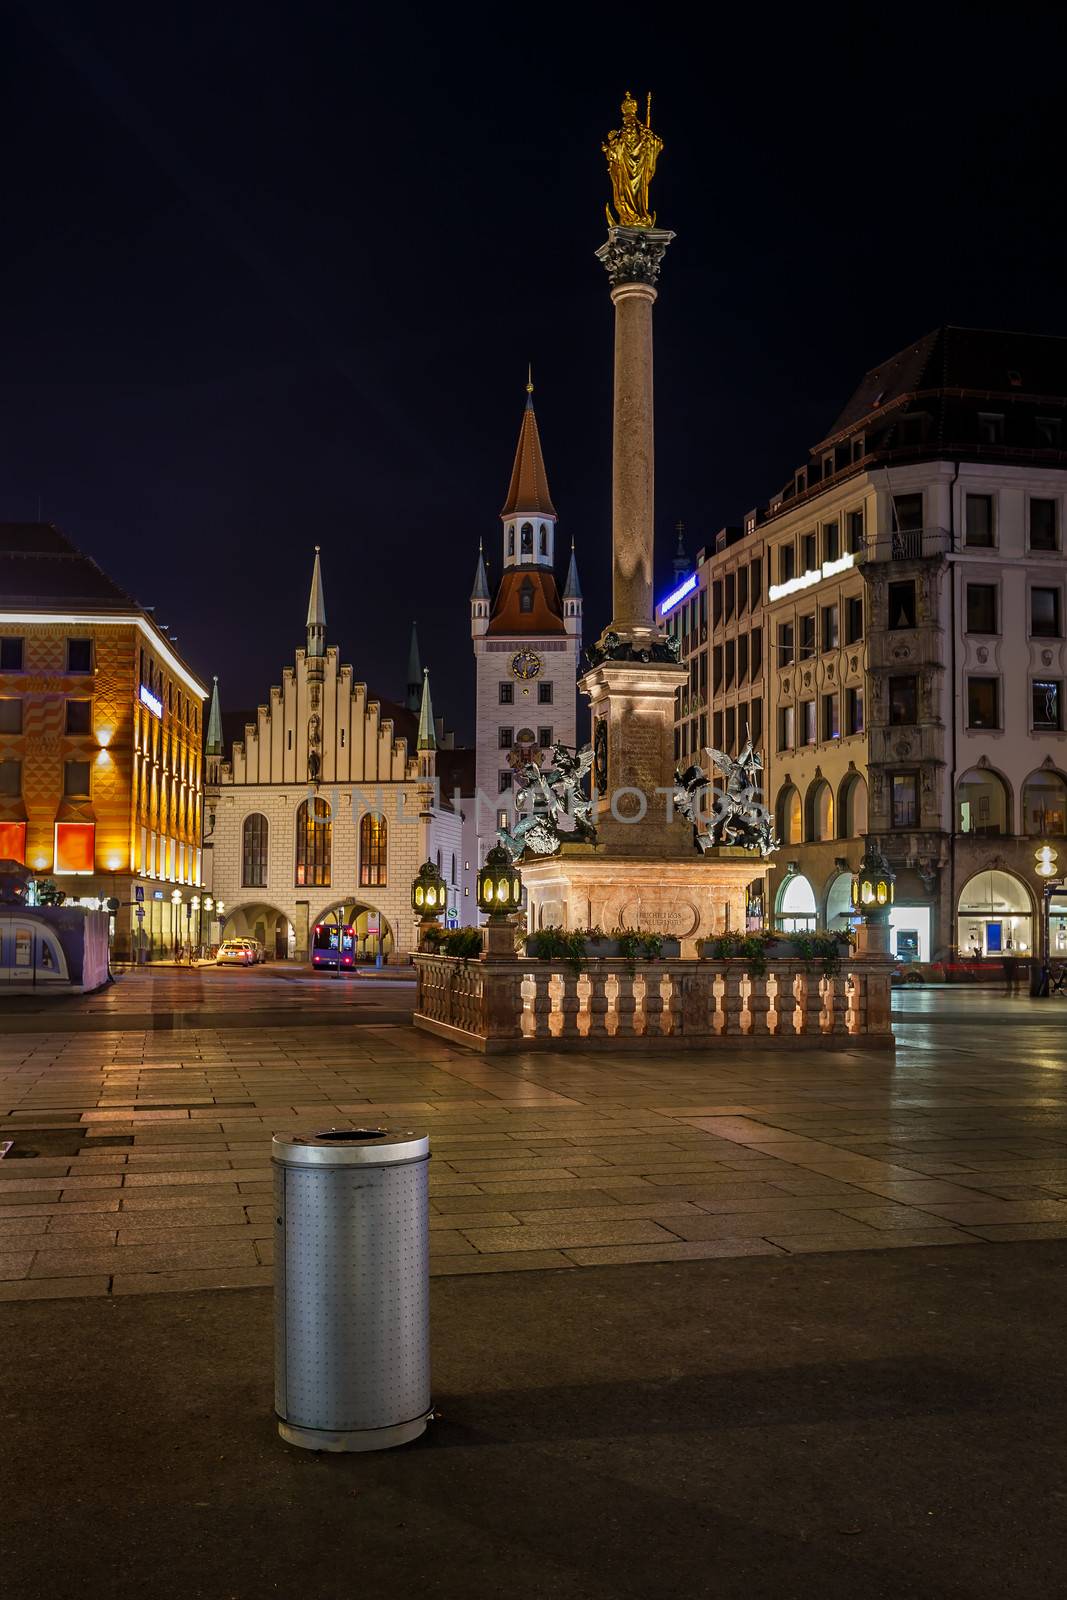 Old Town Hall and Marienplatz in Munich at Night, Bavaria, Germany